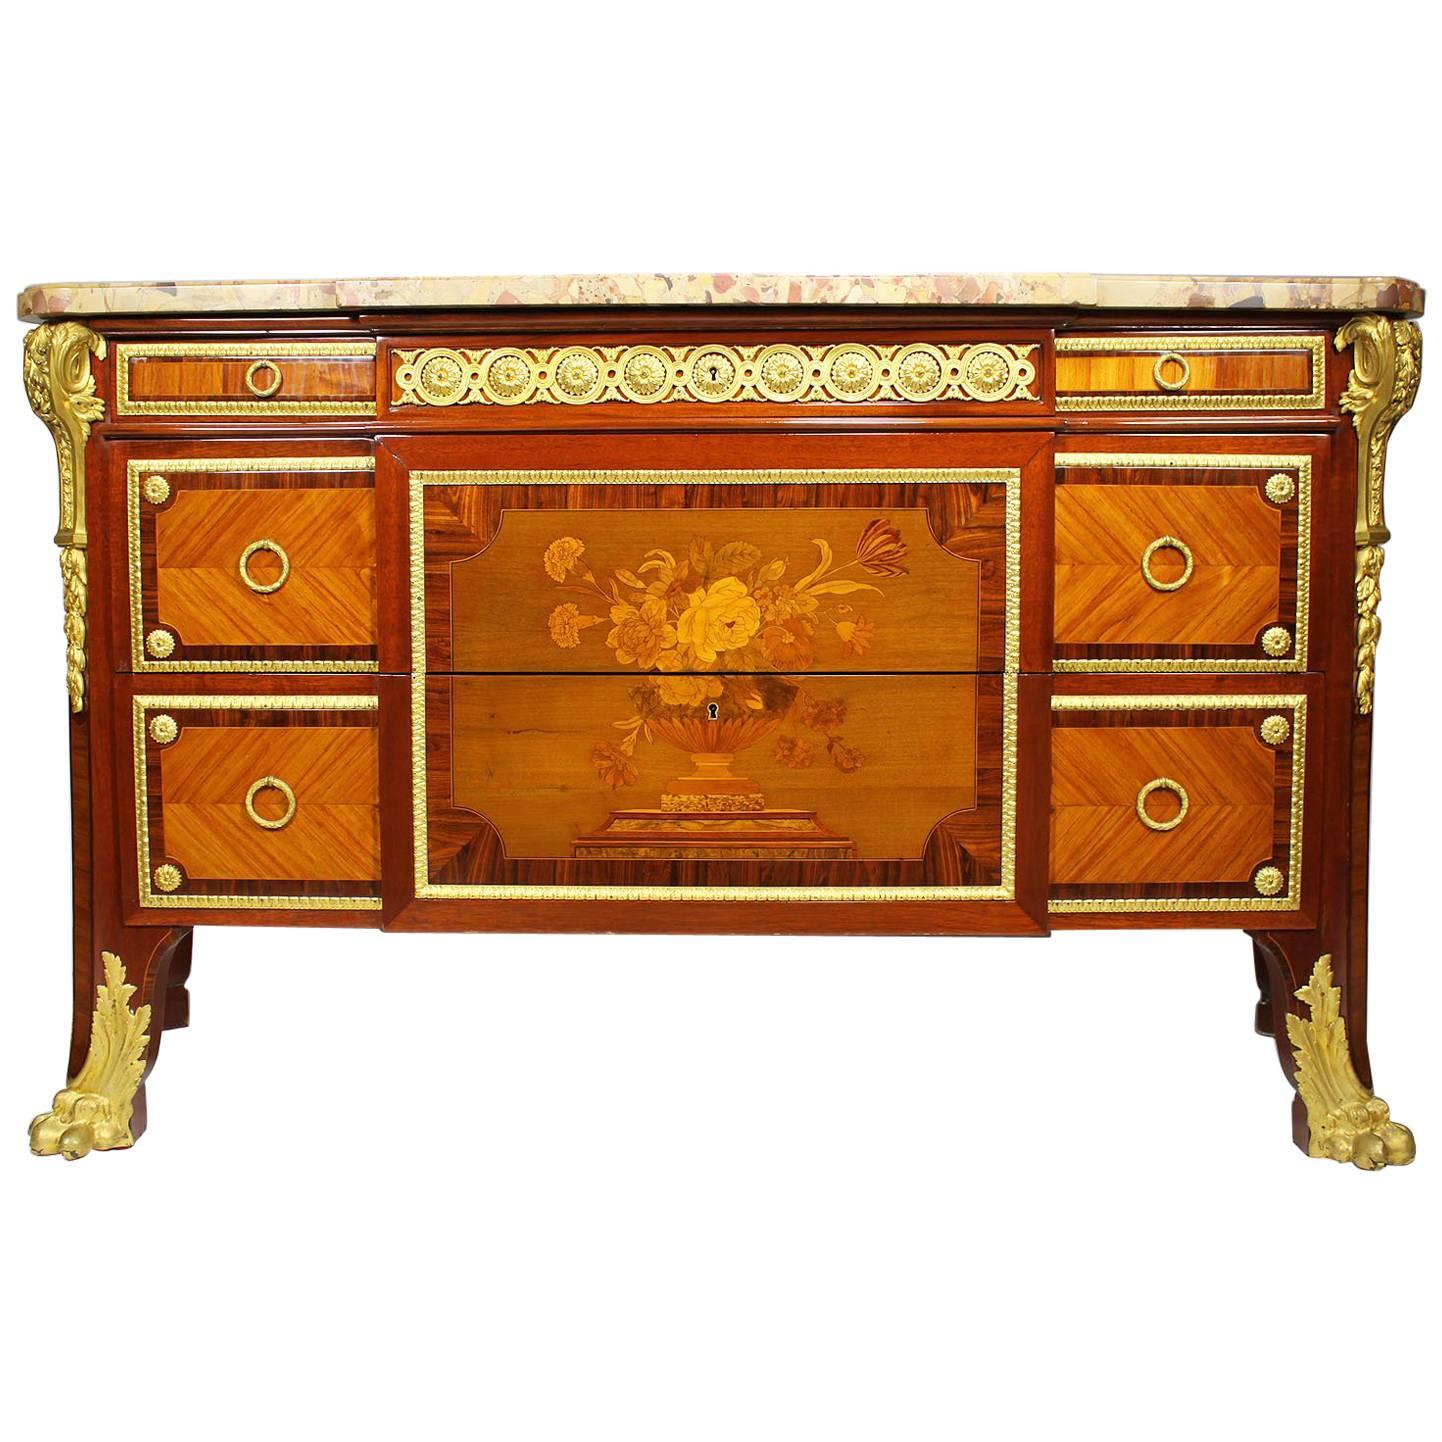 Fine 19th Century Louis XVI Style Neoclassical Commode after Jean-Henri Riesener